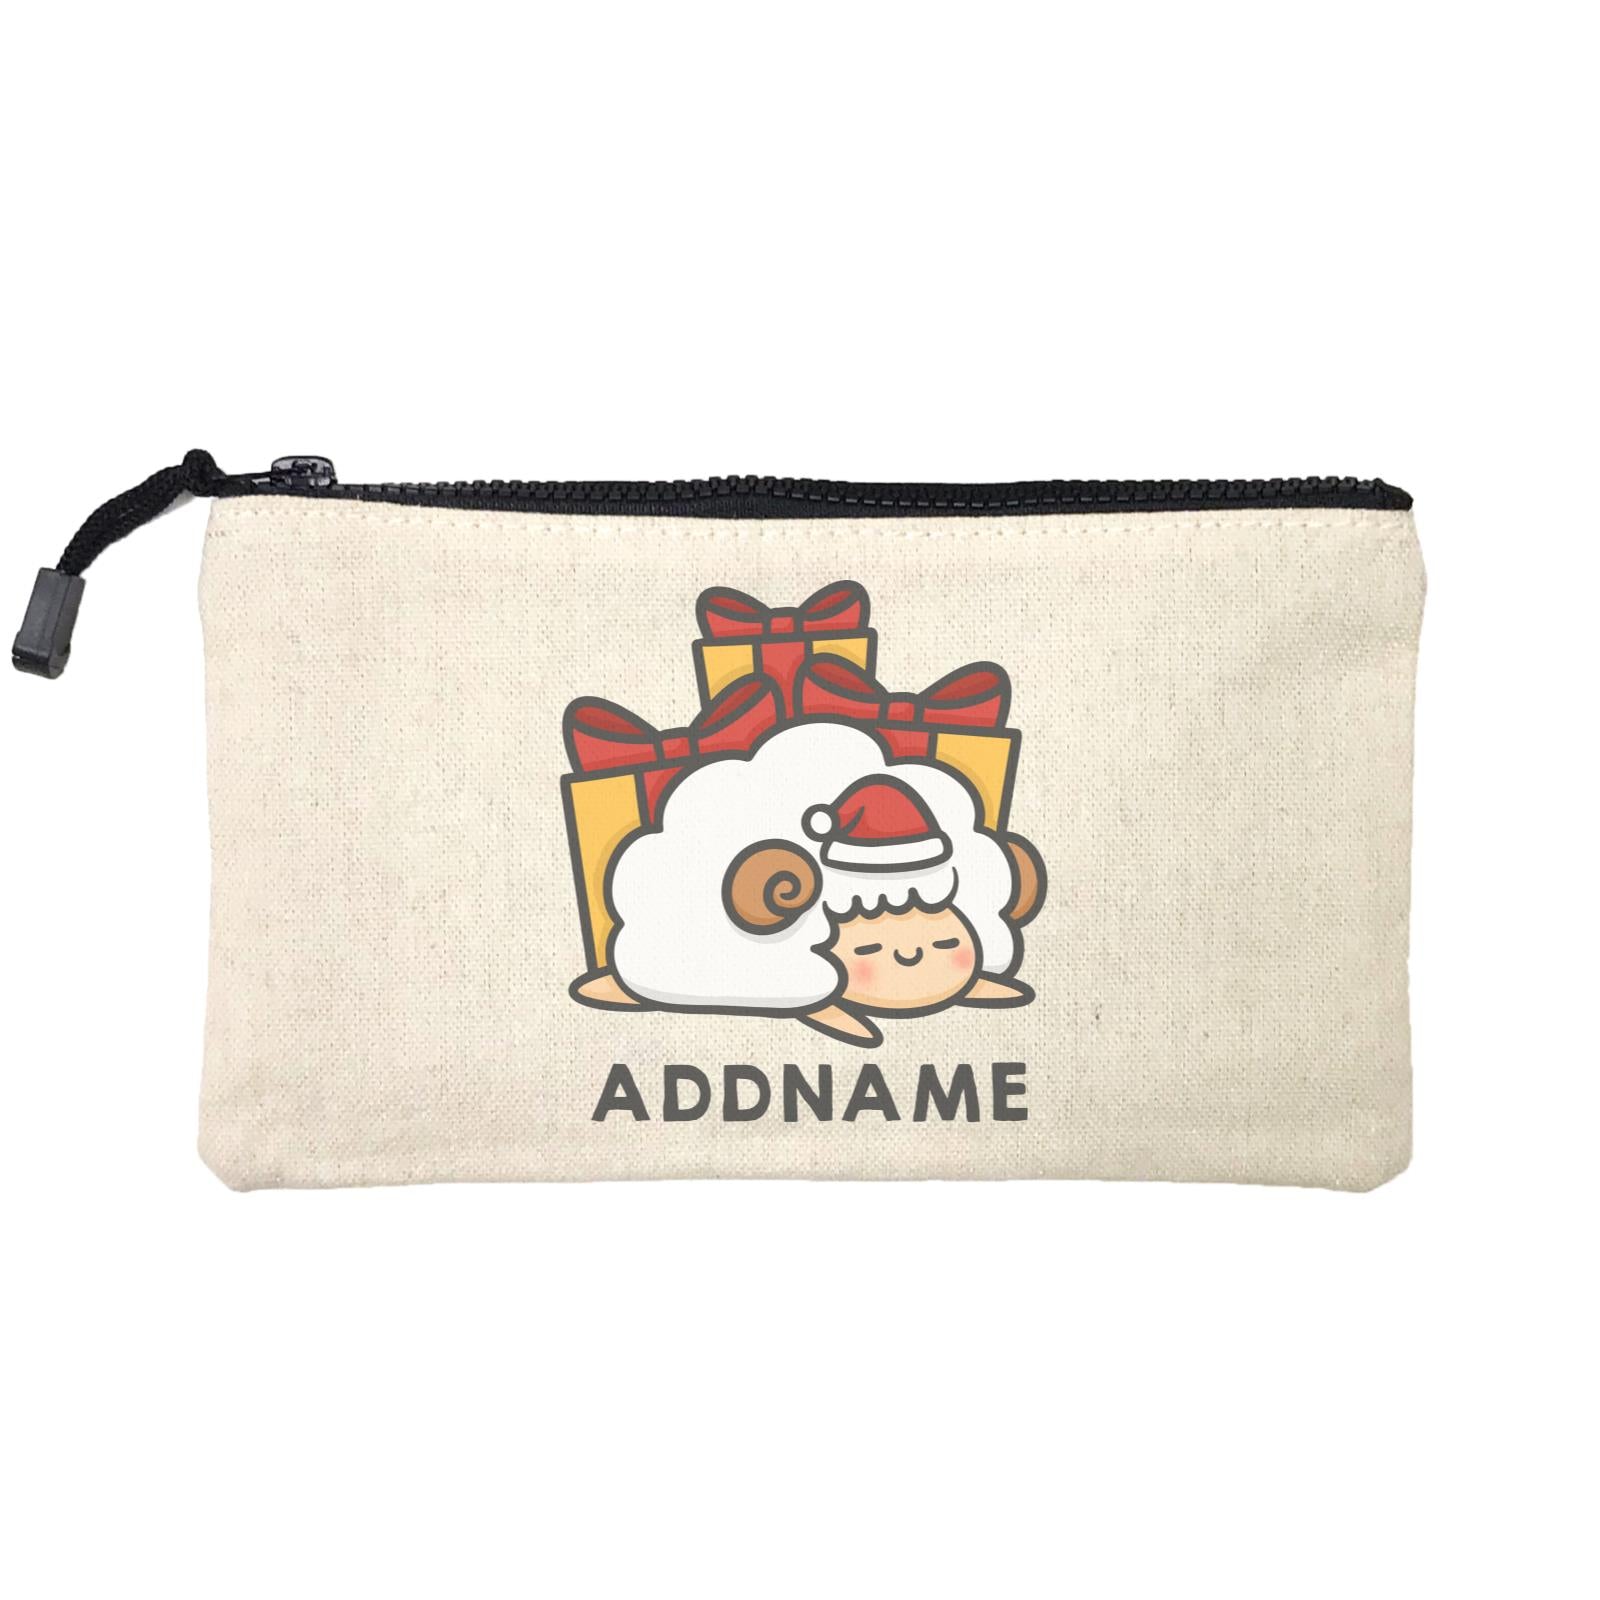 Xmas Cute Sleeping Sheep Addname Mini Accessories Stationery Pouch